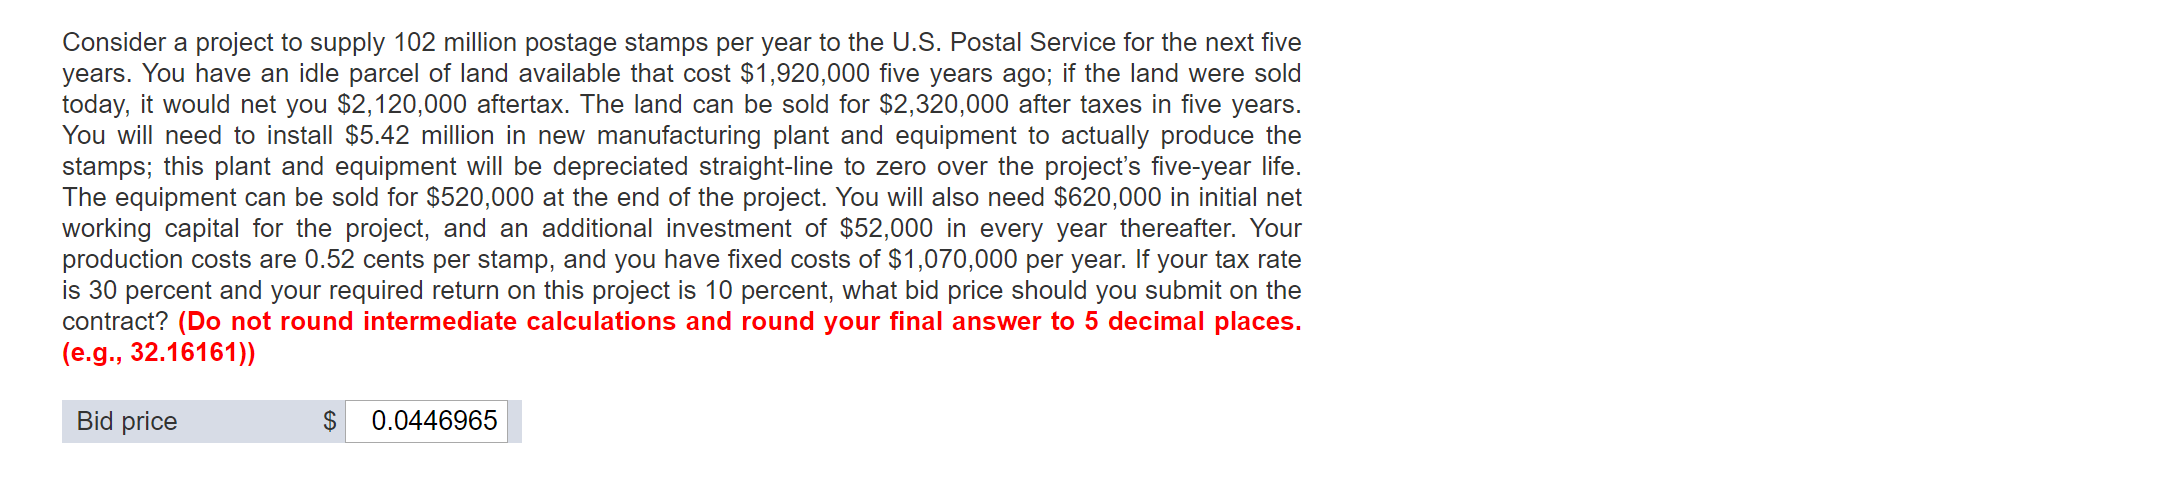 Consider a project to supply 102 million postage stamps per year to the U.S. Postal Service for the next five
years. You have an idle parcel of land available that cost $1,920,000 five years ago; if the land were sold
today, it would net you $2,120,000 aftertax. The land can be sold for $2,320,000 after taxes in five years.
You will need to install $5.42 million in new manufacturing plant and equipment to actually produce the
stamps; this plant and equipment will be depreciated straight-line to zero over the project's five-year life.
The equipment can be sold for $520,000 at the end of the project. You will also need $620,000 in initial net
working capital for the project, and an additional investment of $52,000 in every year thereafter. Your
production costs are 0.52 cents per stamp, and you have fixed costs of $1,070,000 per year. If your tax rate
is 30 percent and your required return on this project is 10 percent, what bid price should you submit on the
contract? (Do not round intermediate calculations and round your final answer to 5 decimal places.
(e.g., 32.16161))
Bid price
0.0446965
